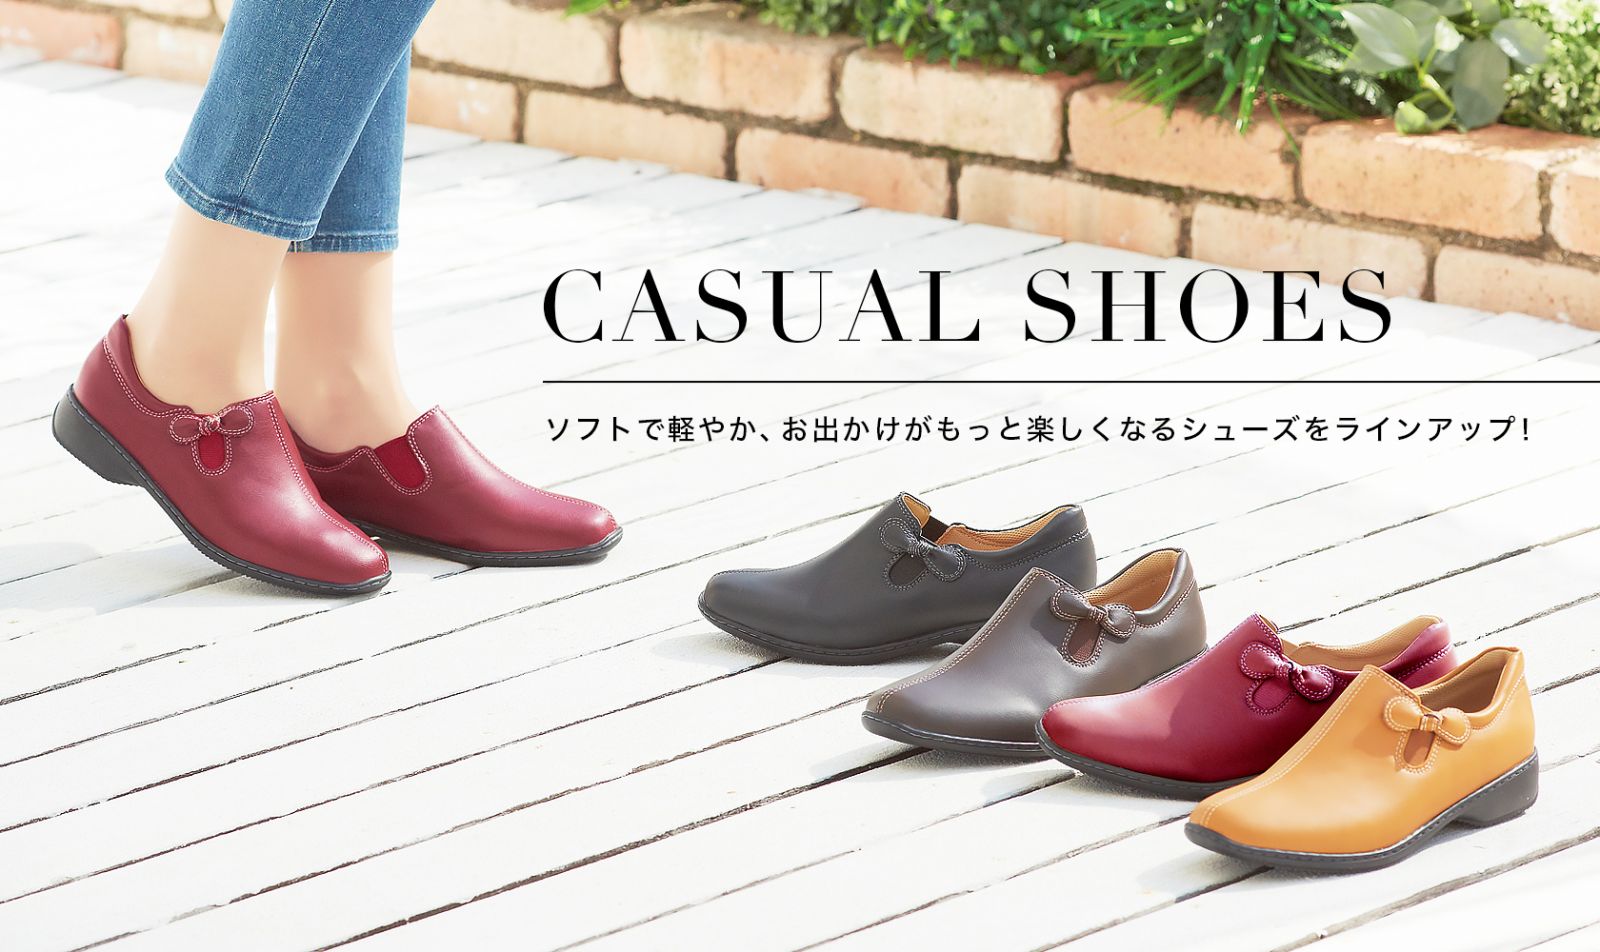 Pansy - Casual Shoes -｜ラインアップ｜株式会社パンジー